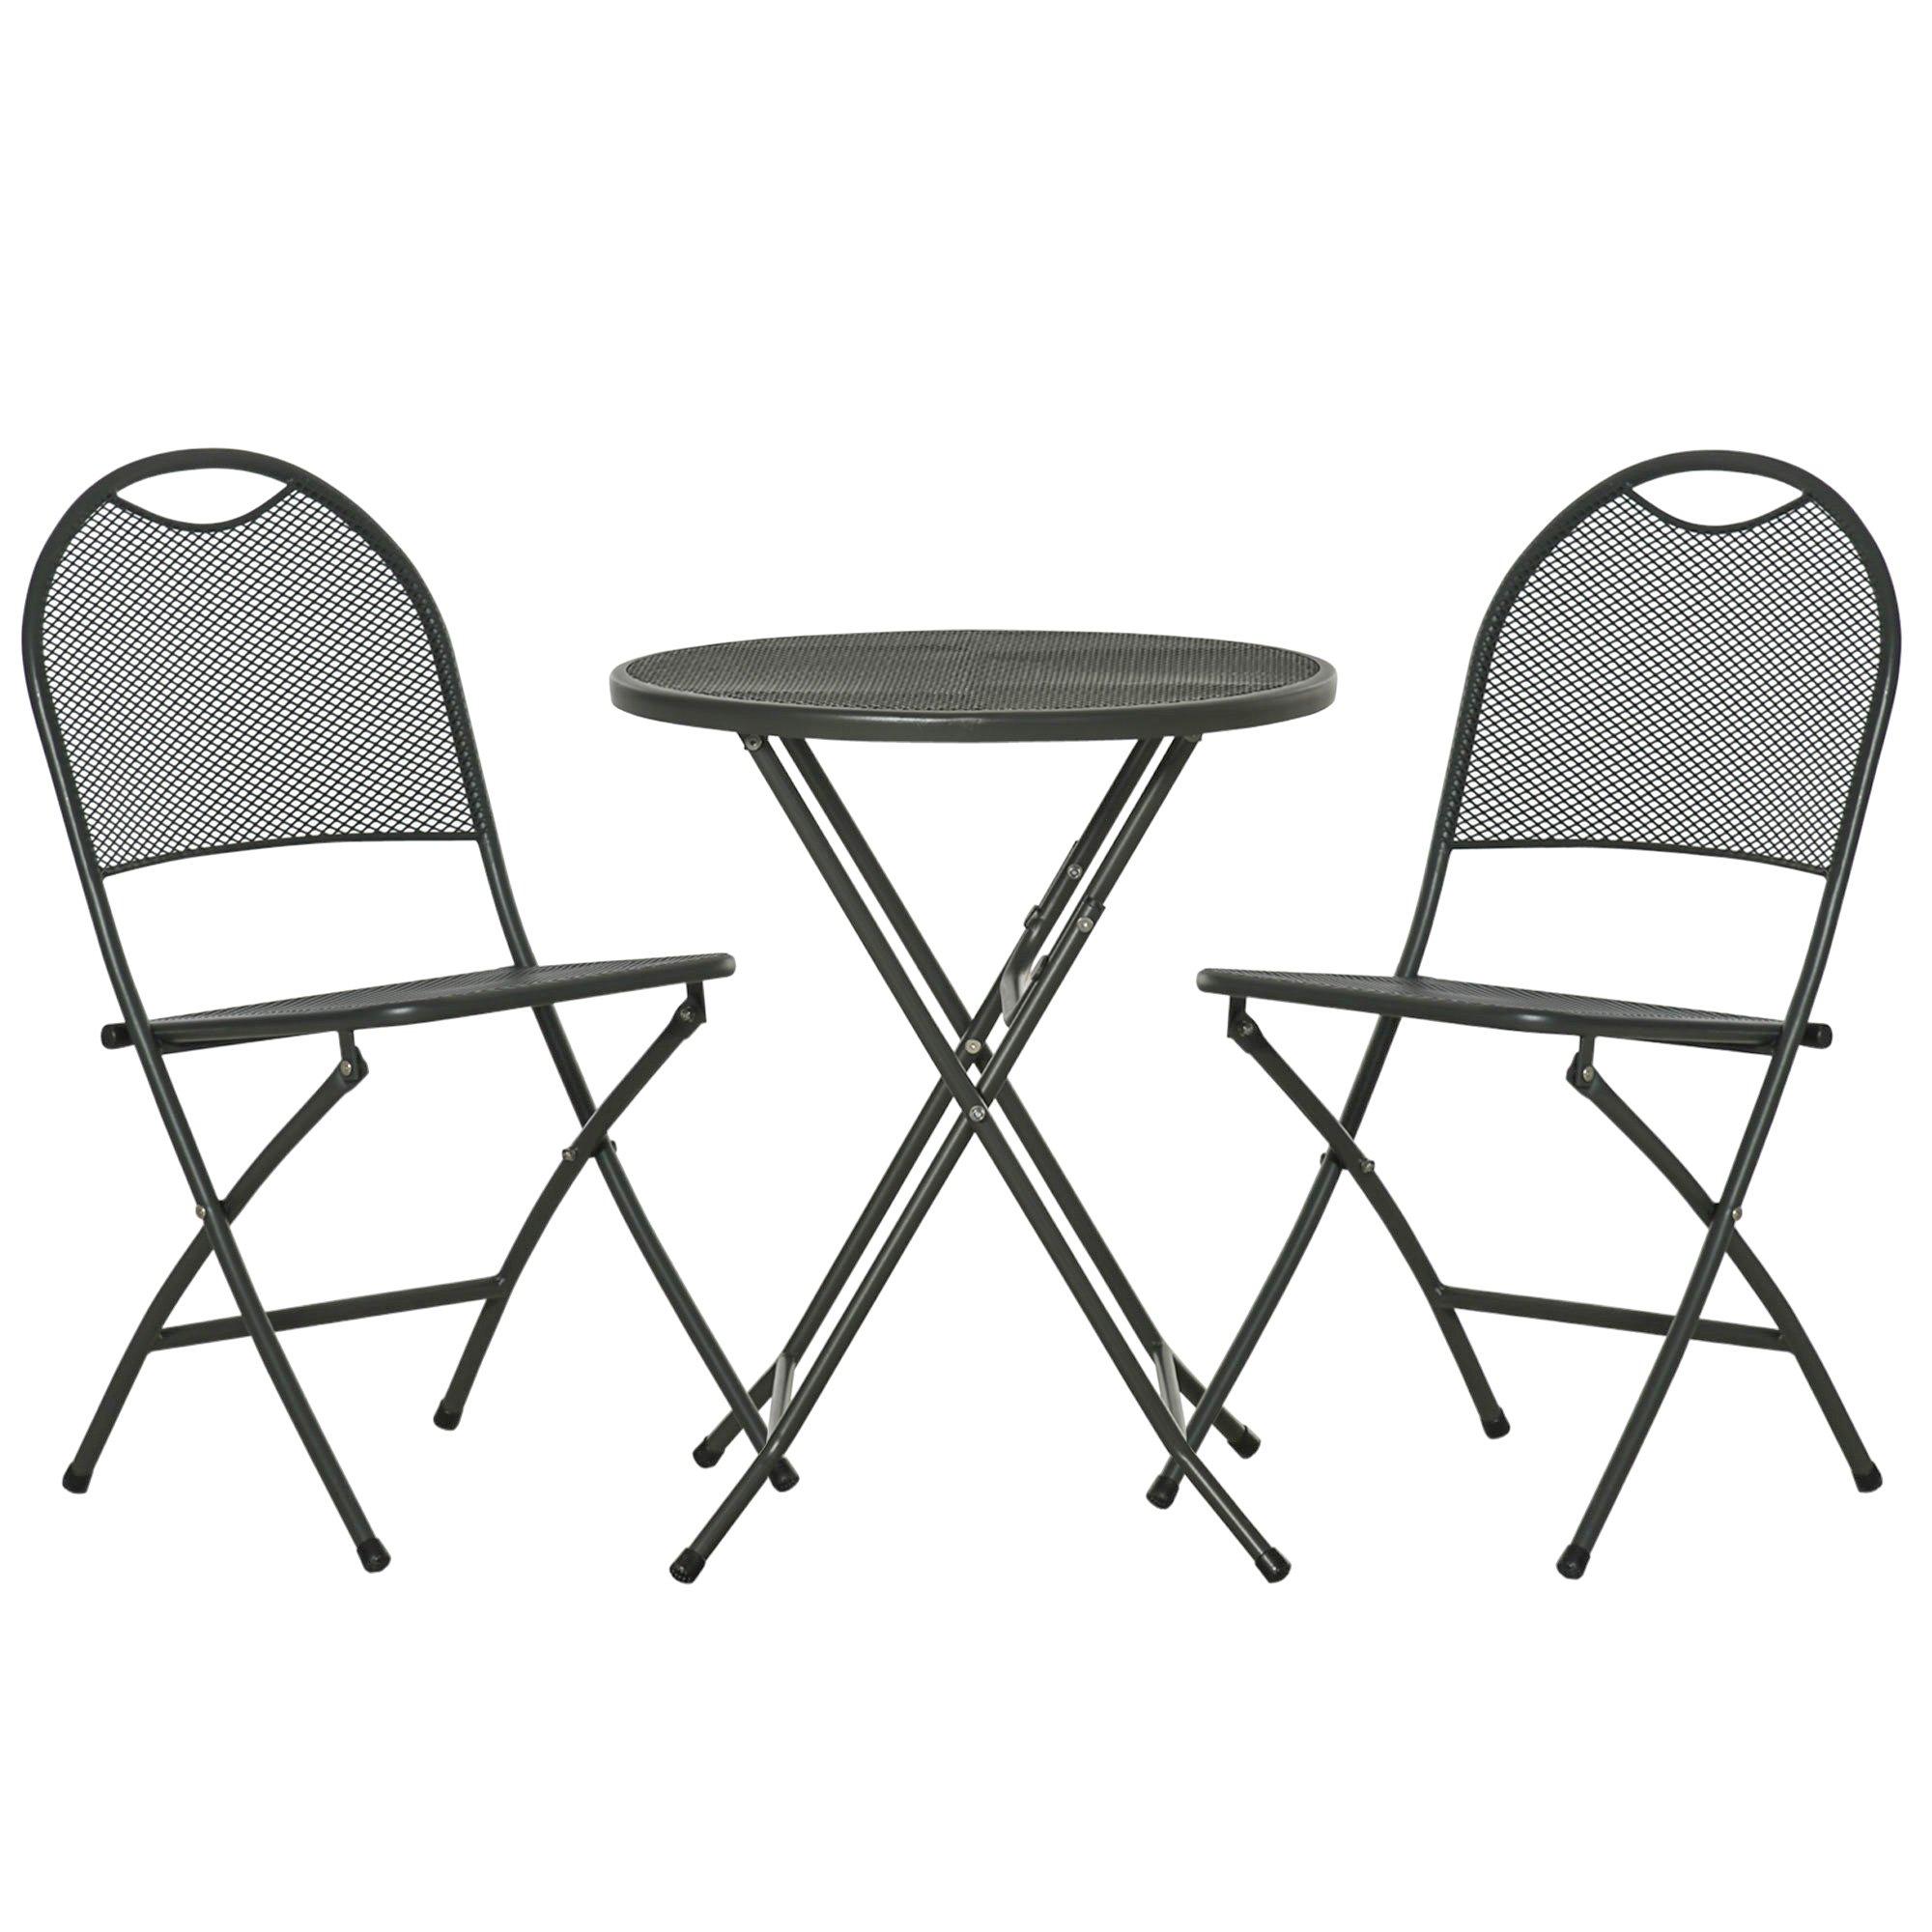 3 Piece Garden Bistro Set with Foldable Design Round Dining Table